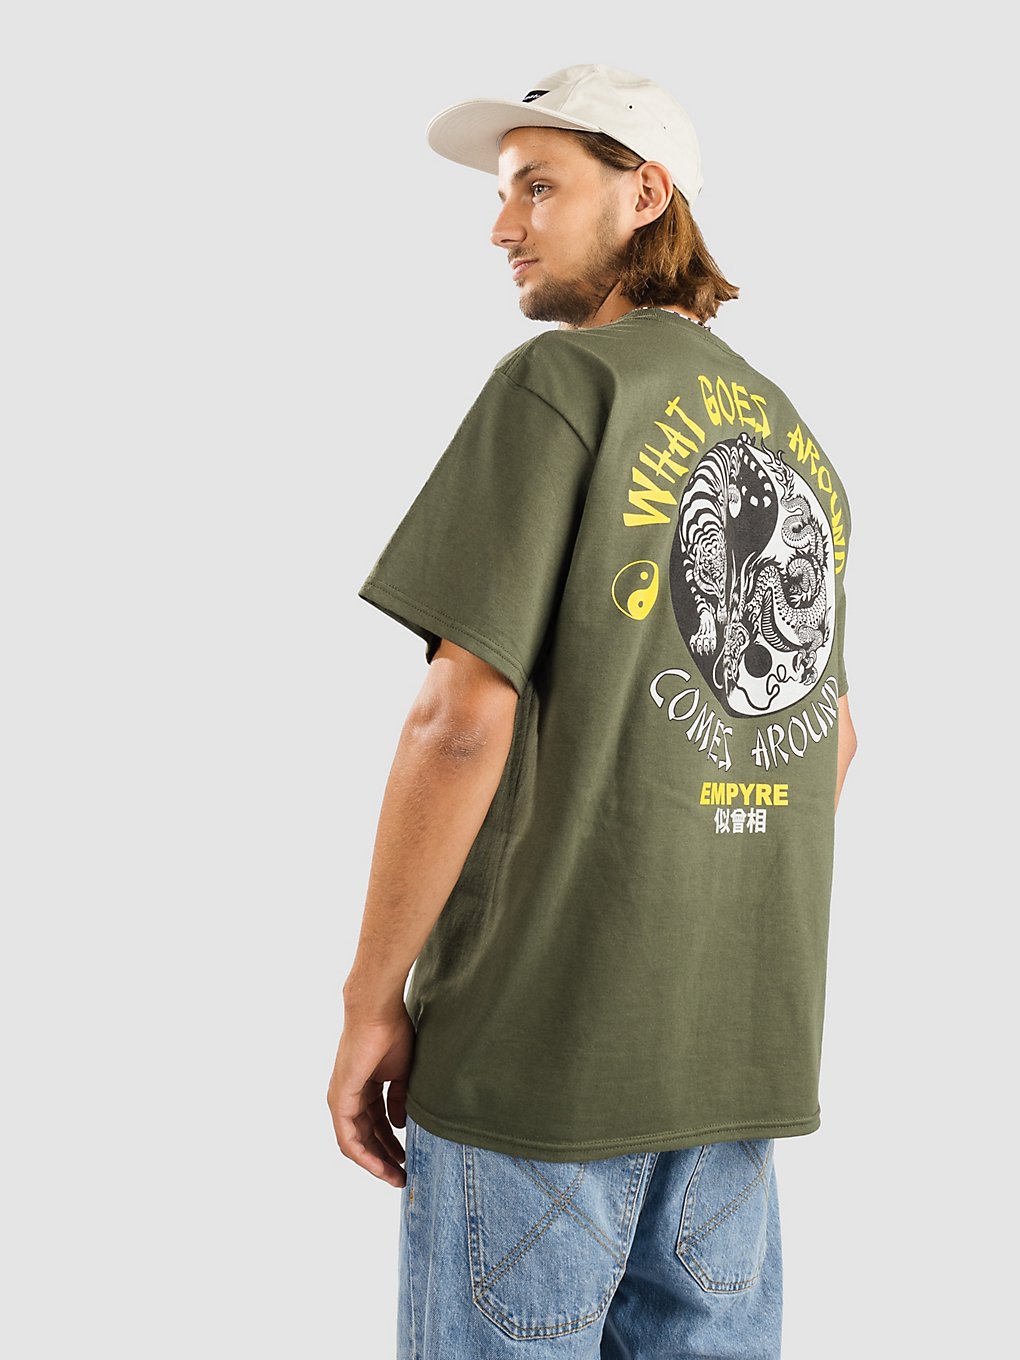 Empyre Goes Around Comes T-Shirt groen